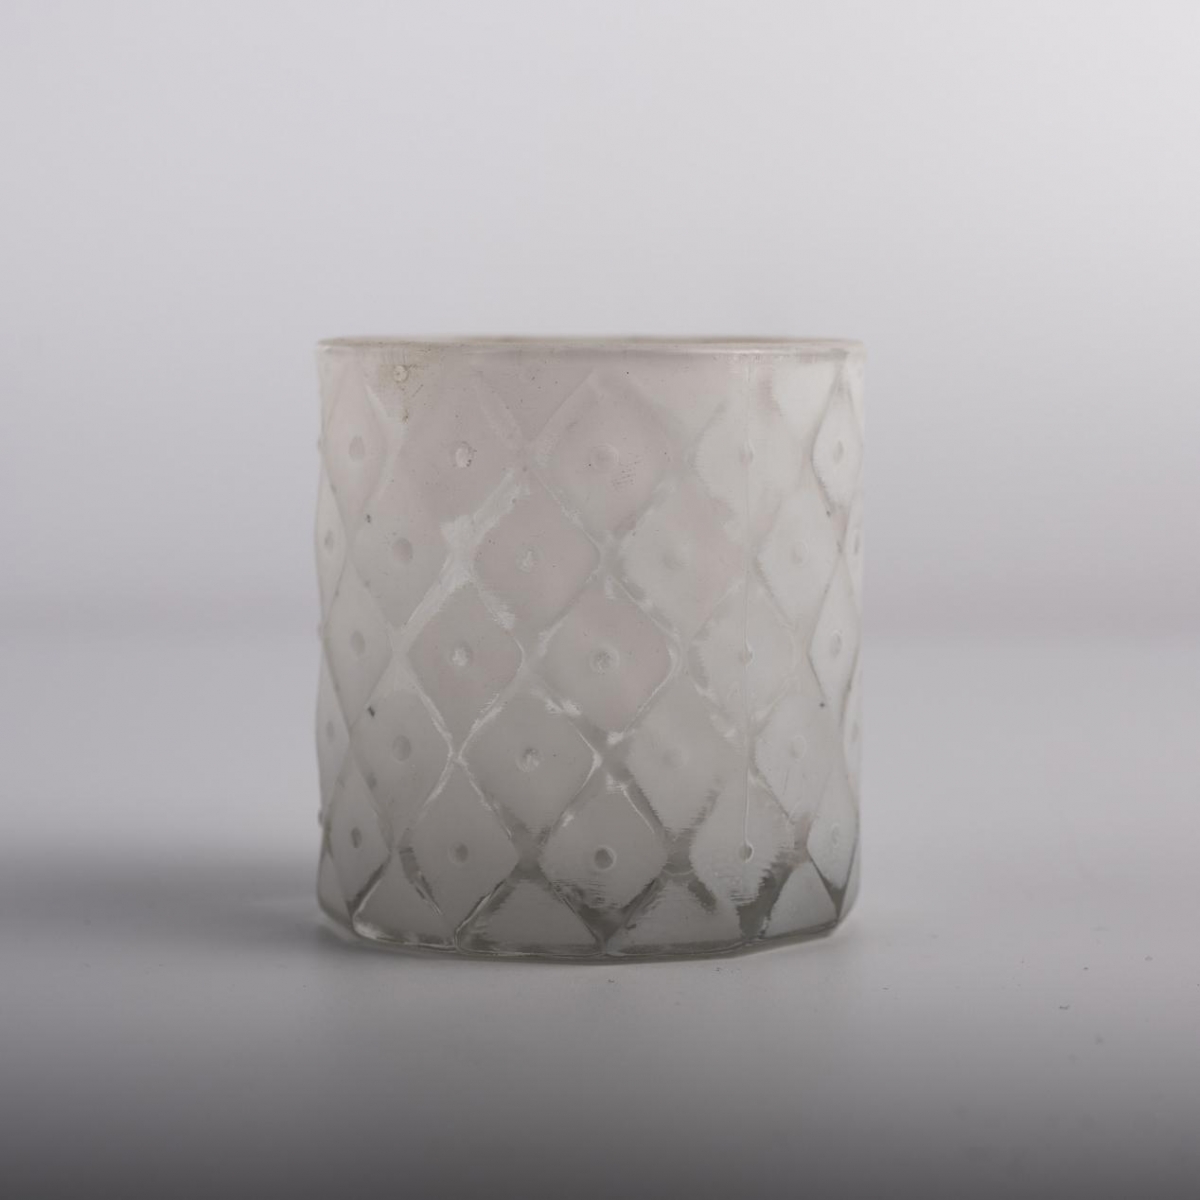 Wholesale Polish Embossed Honeycomb Glass Candle Holder Ceramic White Woven Pattern DornockHome Decoration China Factory Supply NL USA-HOWCANDLE-Scented Candles,Soy Candles,Beeswax Candles,Tea light Candles,Citronella Candles,Tin Candles,Jar Candles,Taper Candles,Pillar Candles,Jo Malone Candles,Gift Set Candles,Wooden Wicks Candles,Tom Ford Candles,Man Candles,Essential Oils,Perfume Oils,Fragrance Oils,Reed Diffuser,Oil Diffusers,Candle Holder,Wax Warmer,